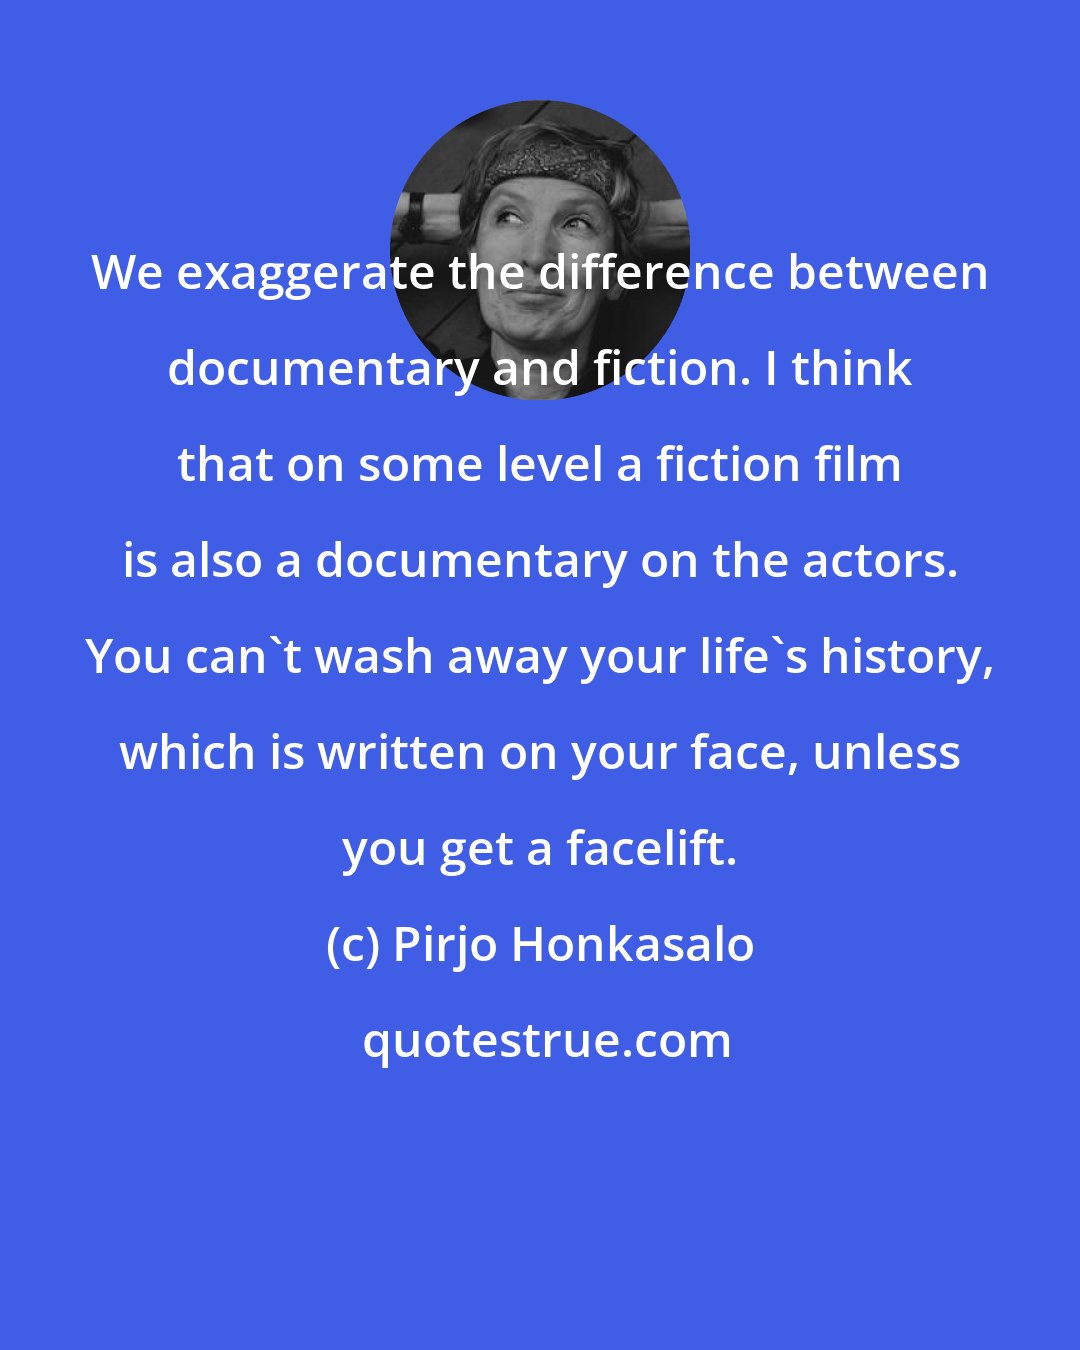 Pirjo Honkasalo: We exaggerate the difference between documentary and fiction. I think that on some level a fiction film is also a documentary on the actors. You can't wash away your life's history, which is written on your face, unless you get a facelift.